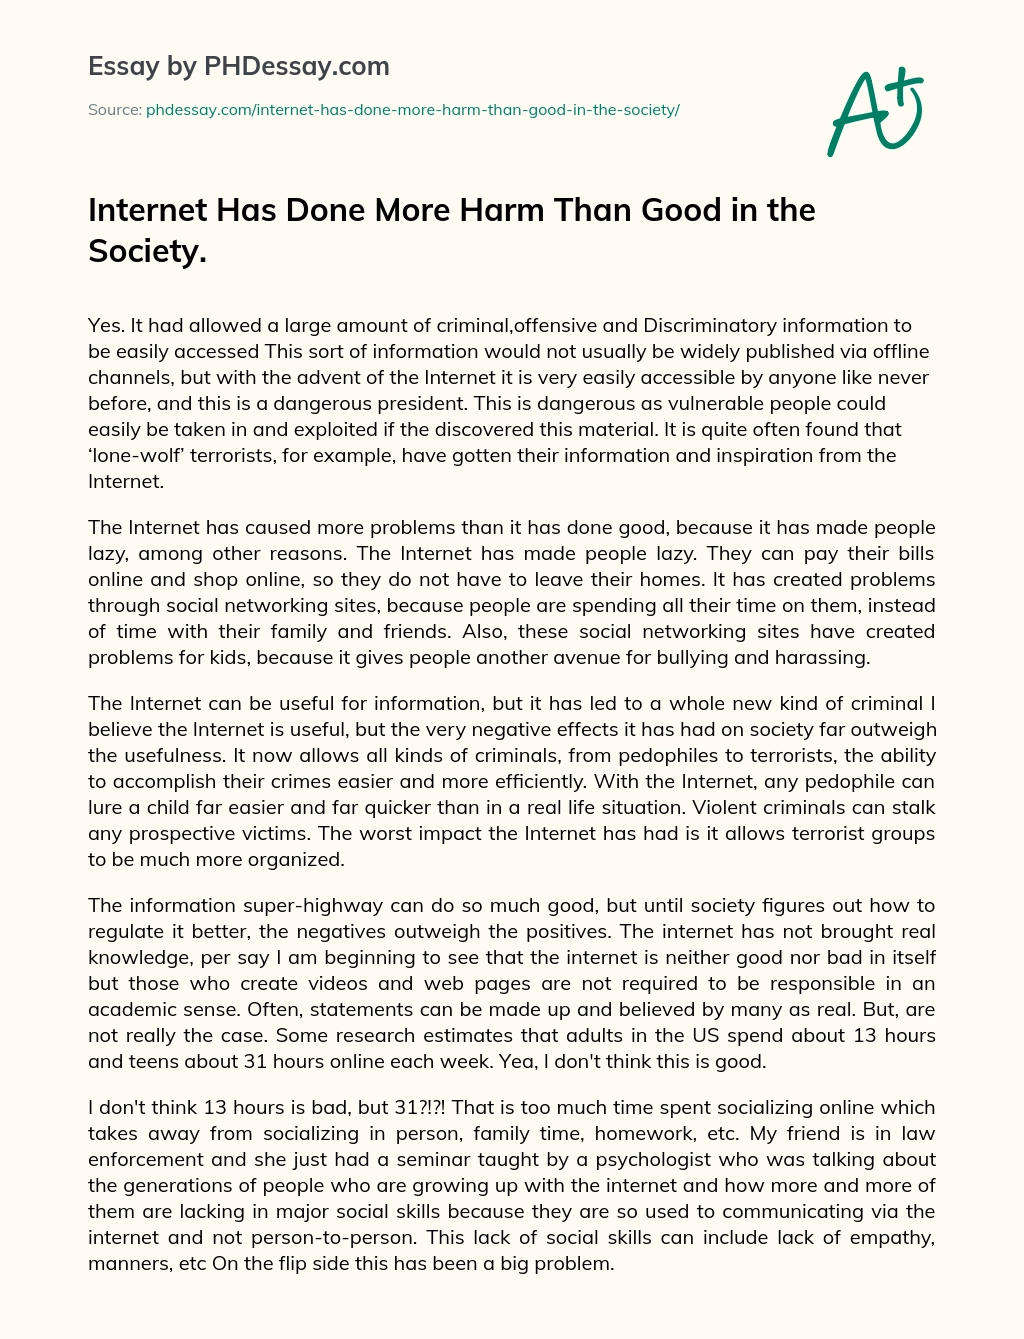 Internet Has Done More Harm Than Good in the Society. essay